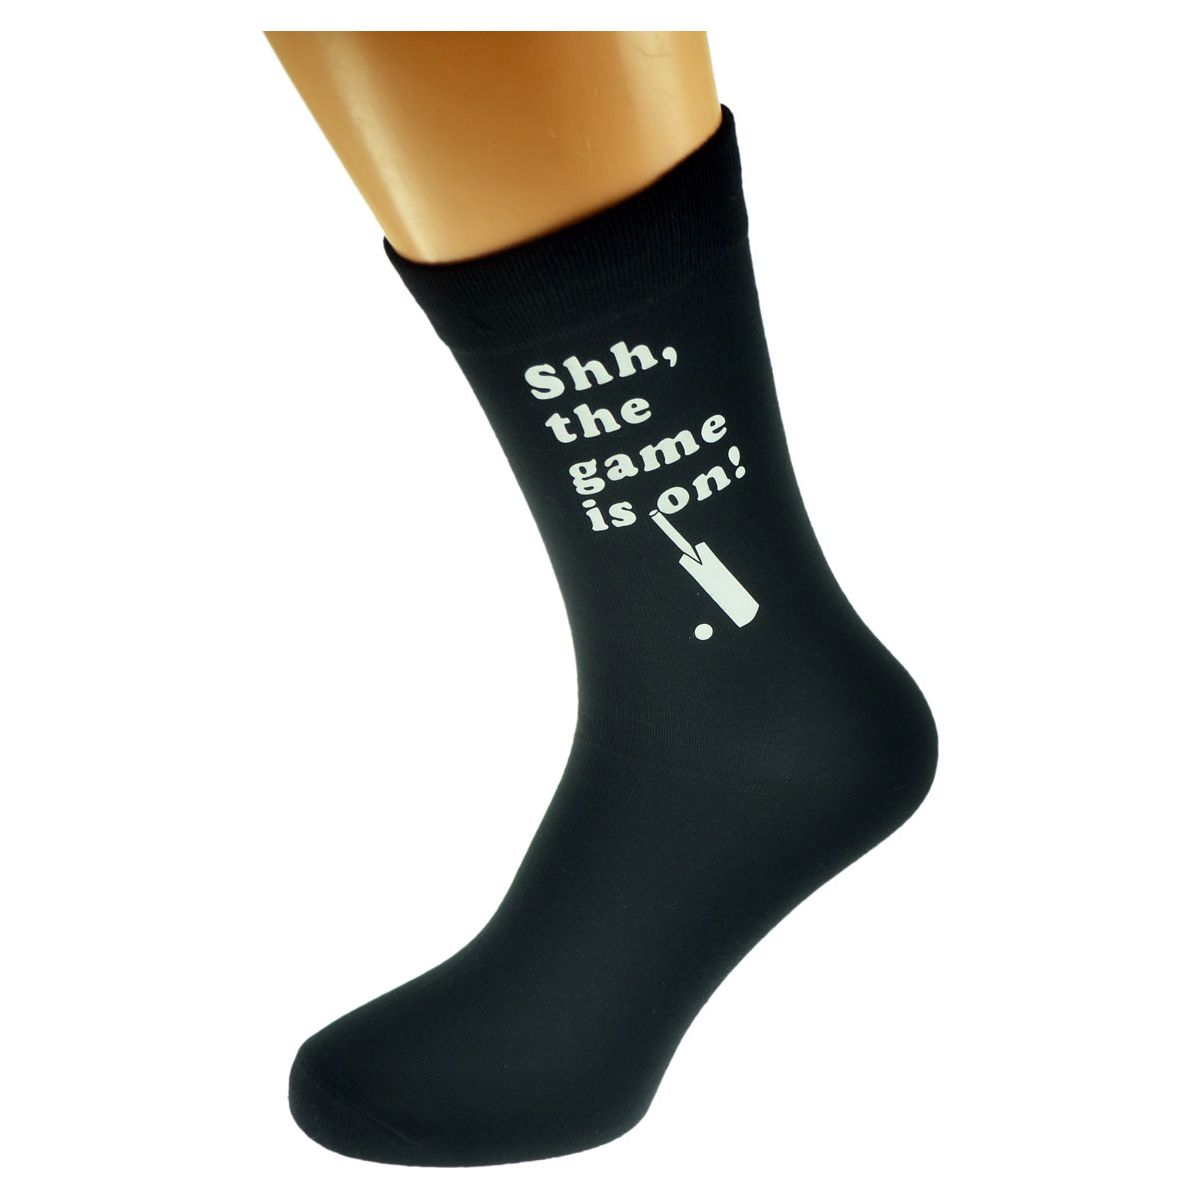 Shh the game is on Cricket Fan Mens Black Socks - Ashton and Finch